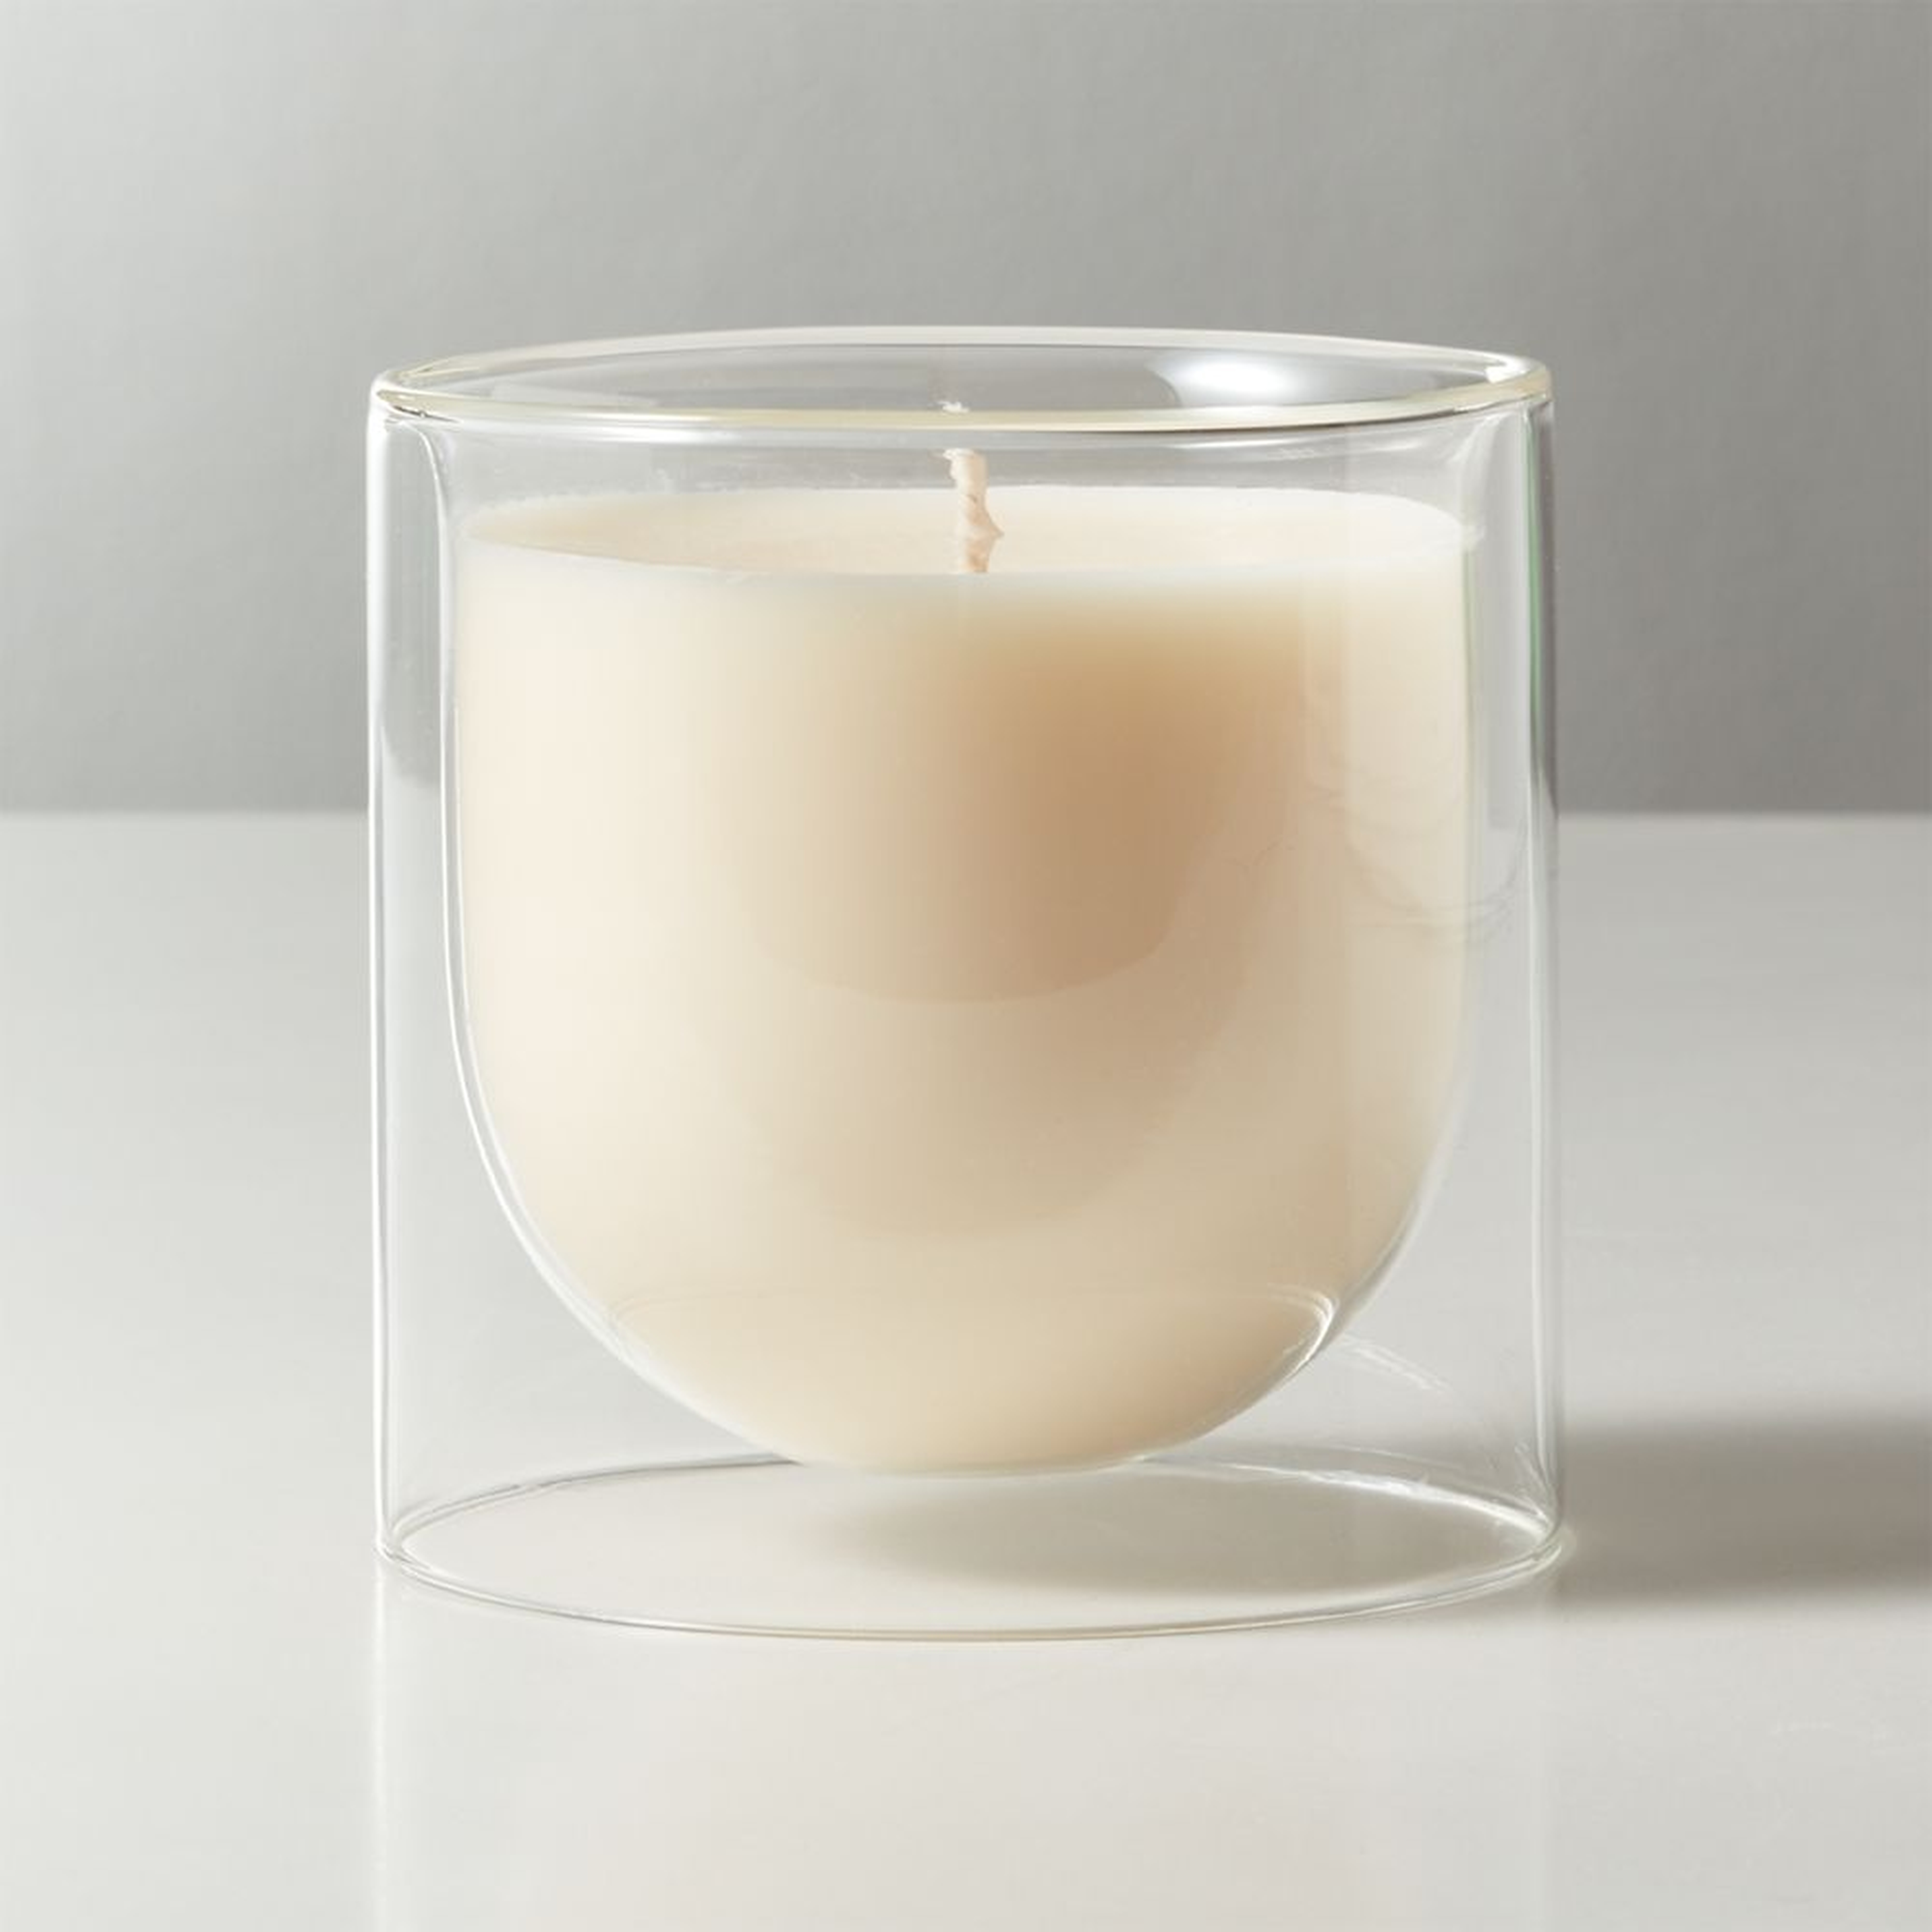 Sage and Cedarwood Soy Candle - CB2